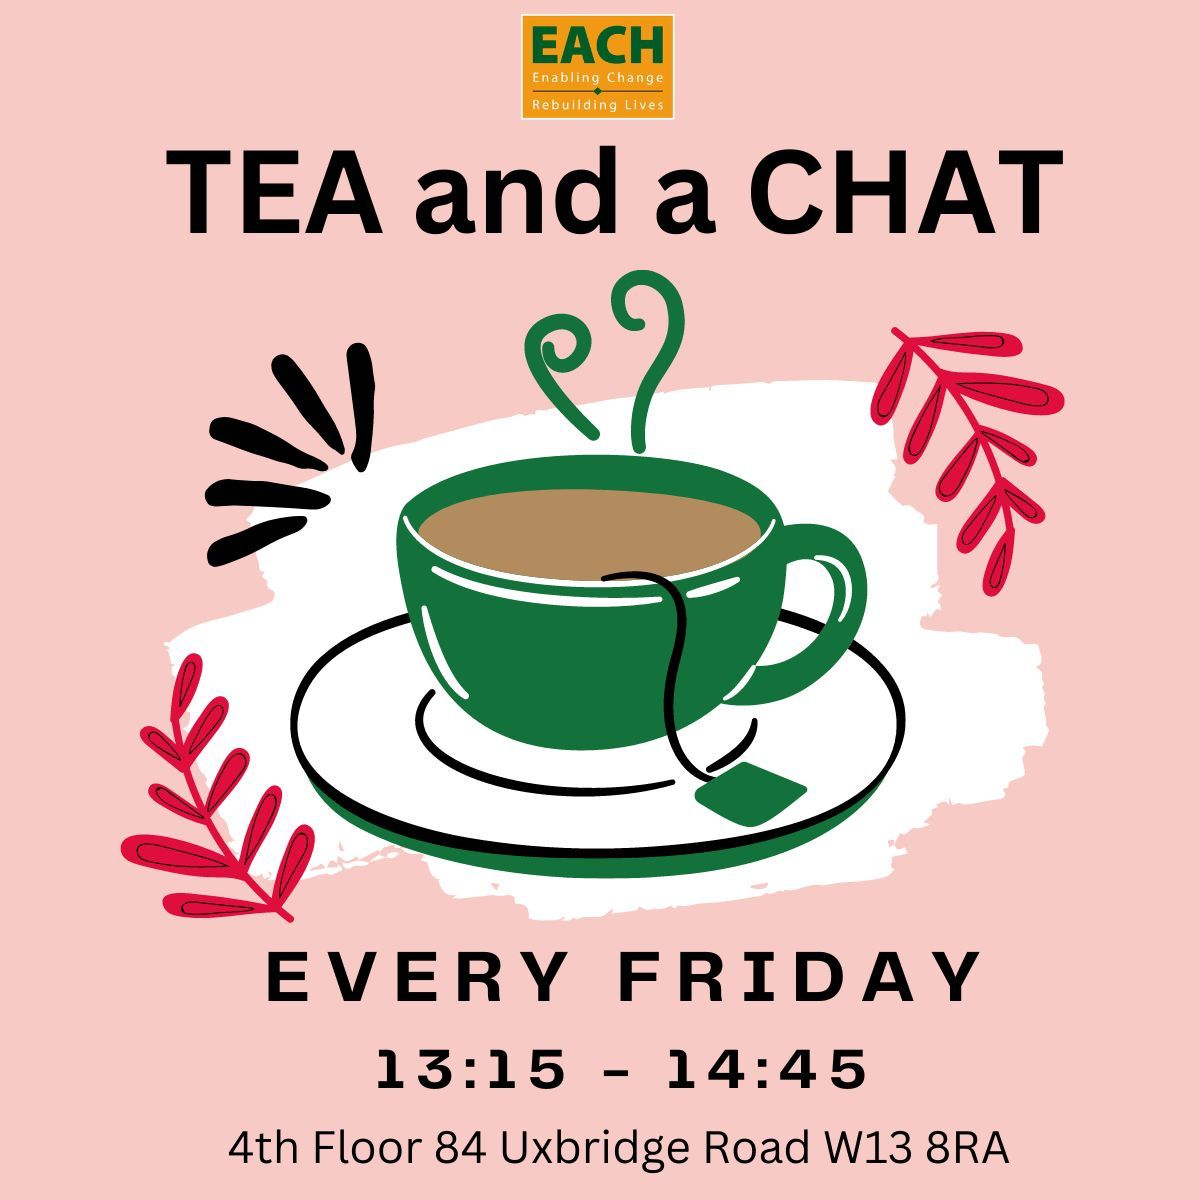 Let's talk about stress! For our service users, Join us every Friday for candid conversations about mental health and stress management. Our team is here to provide support, advice, and a listening ear. #Teaandchat #StressAwarenessMonth #EACHCounselling